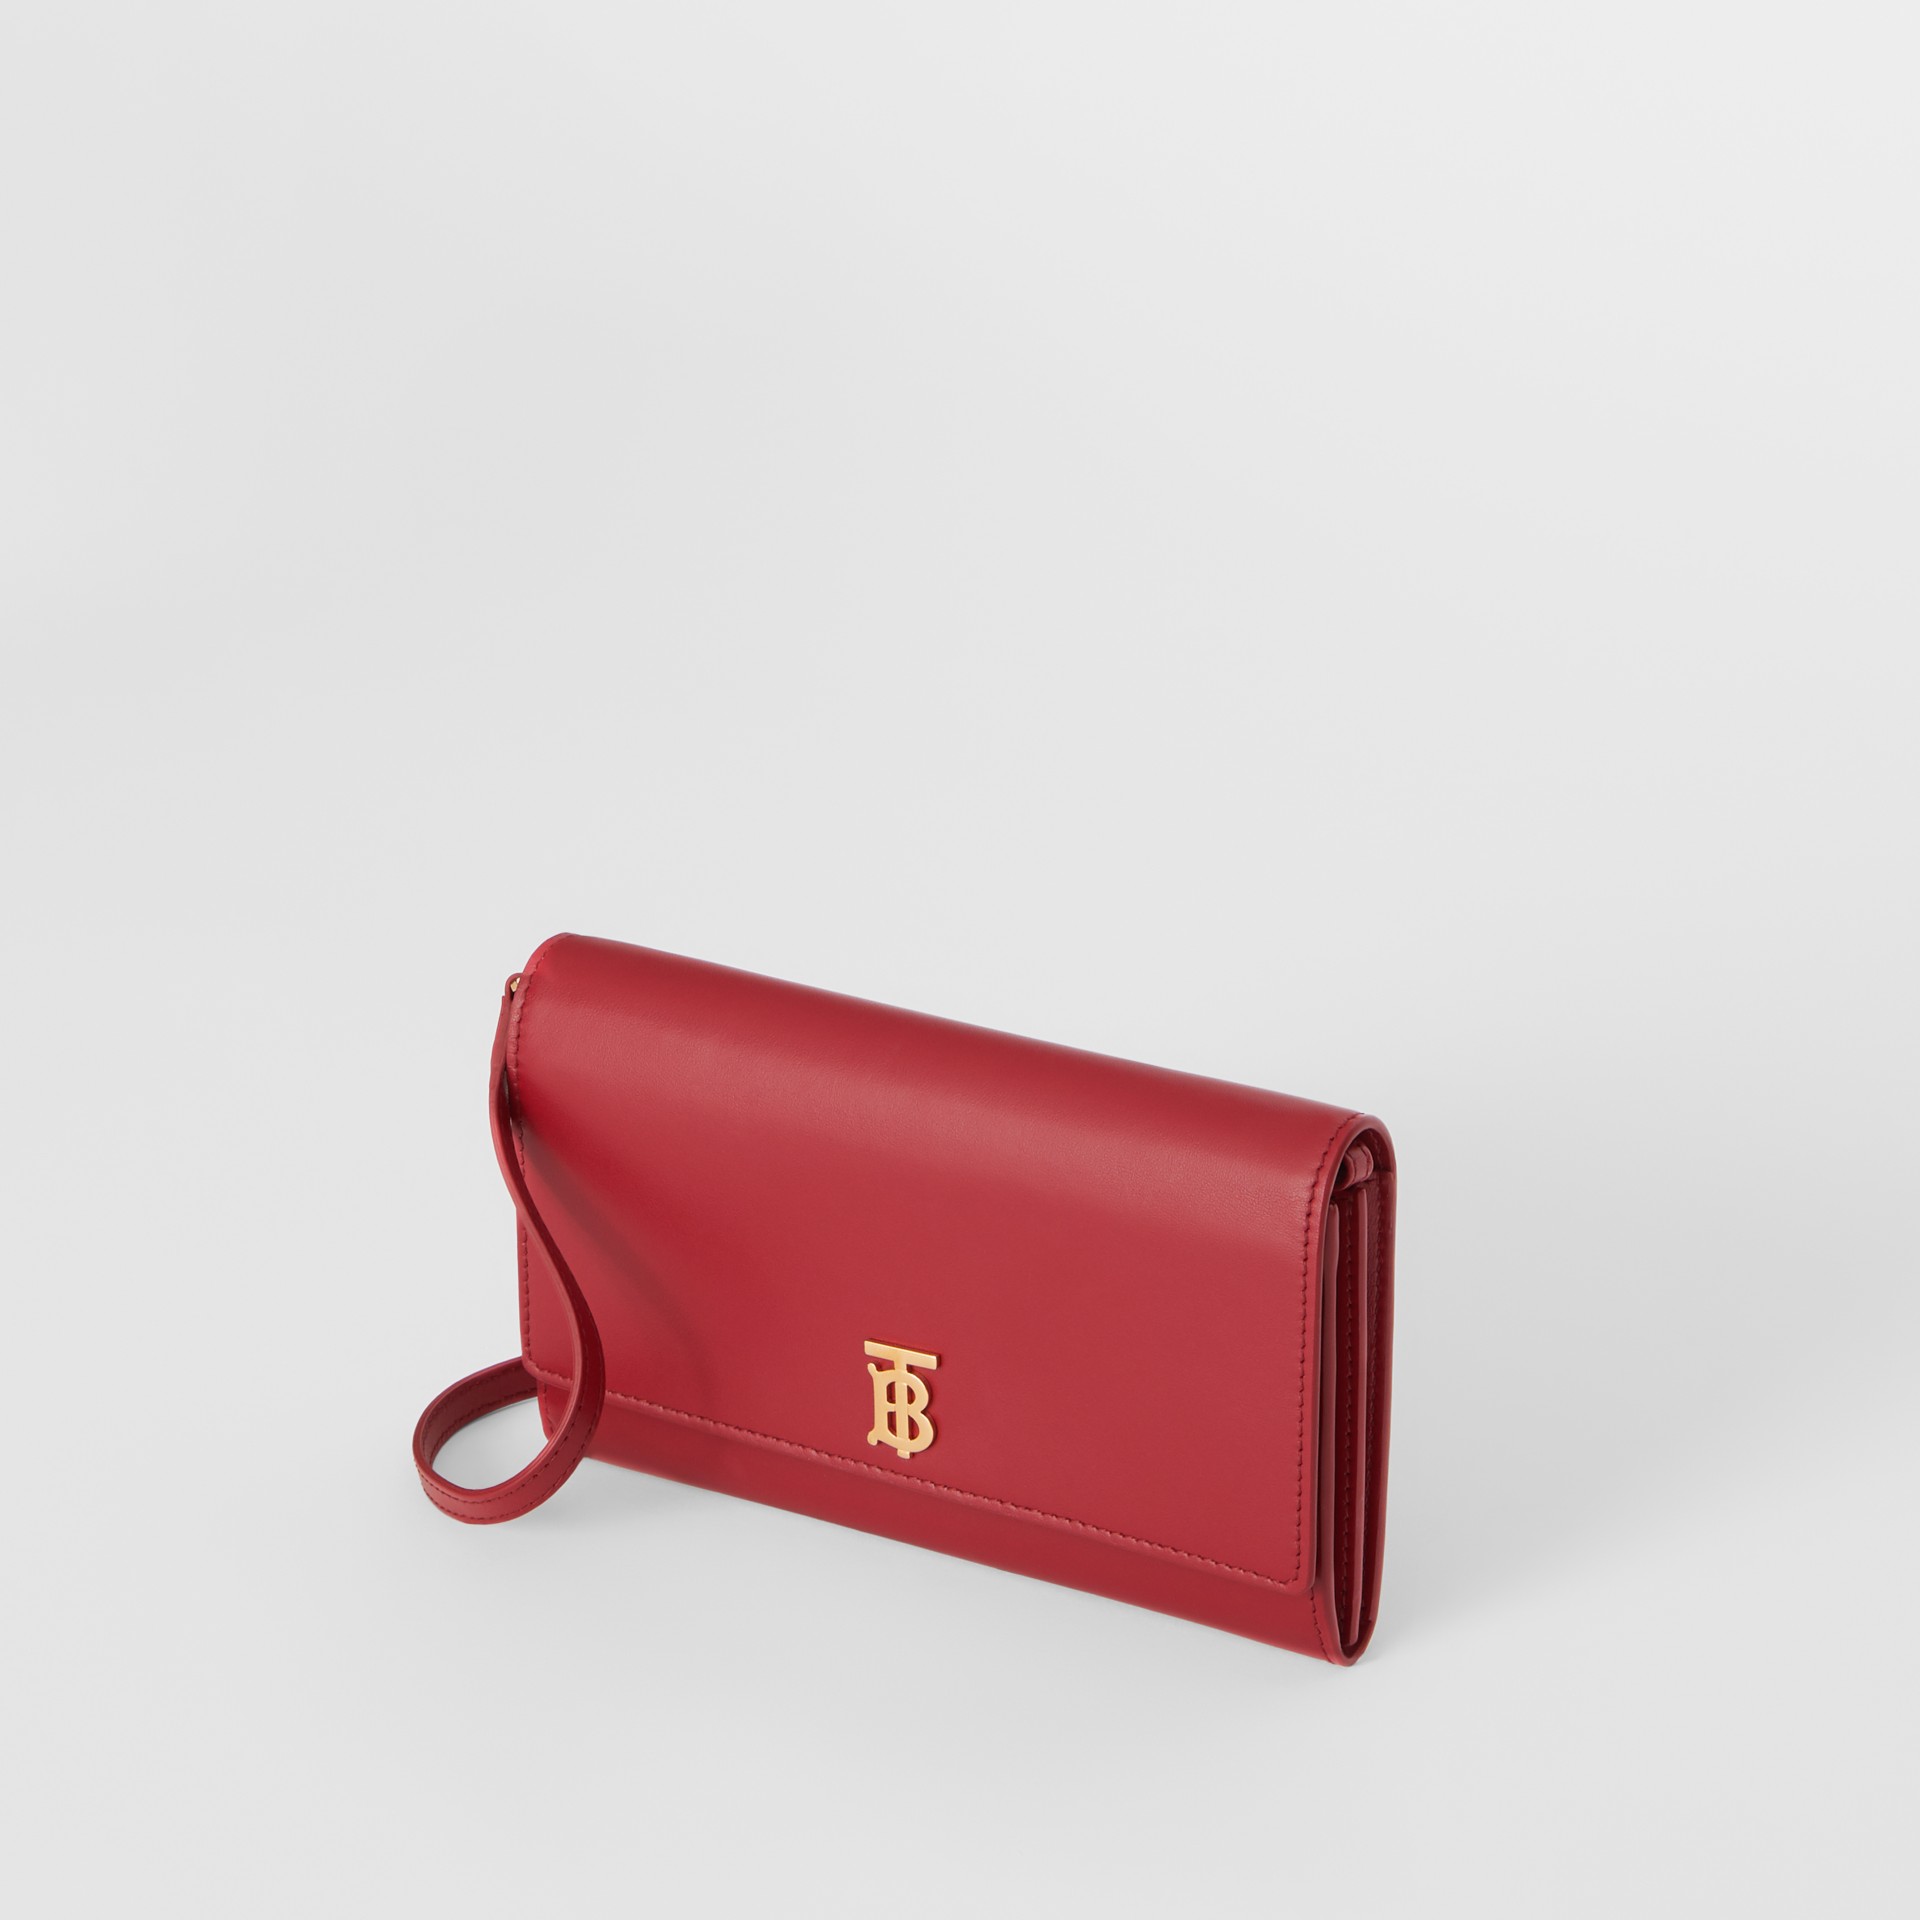 Monogram Motif Leather Wallet with Detachable Strap in Crimson - Women | Burberry United States